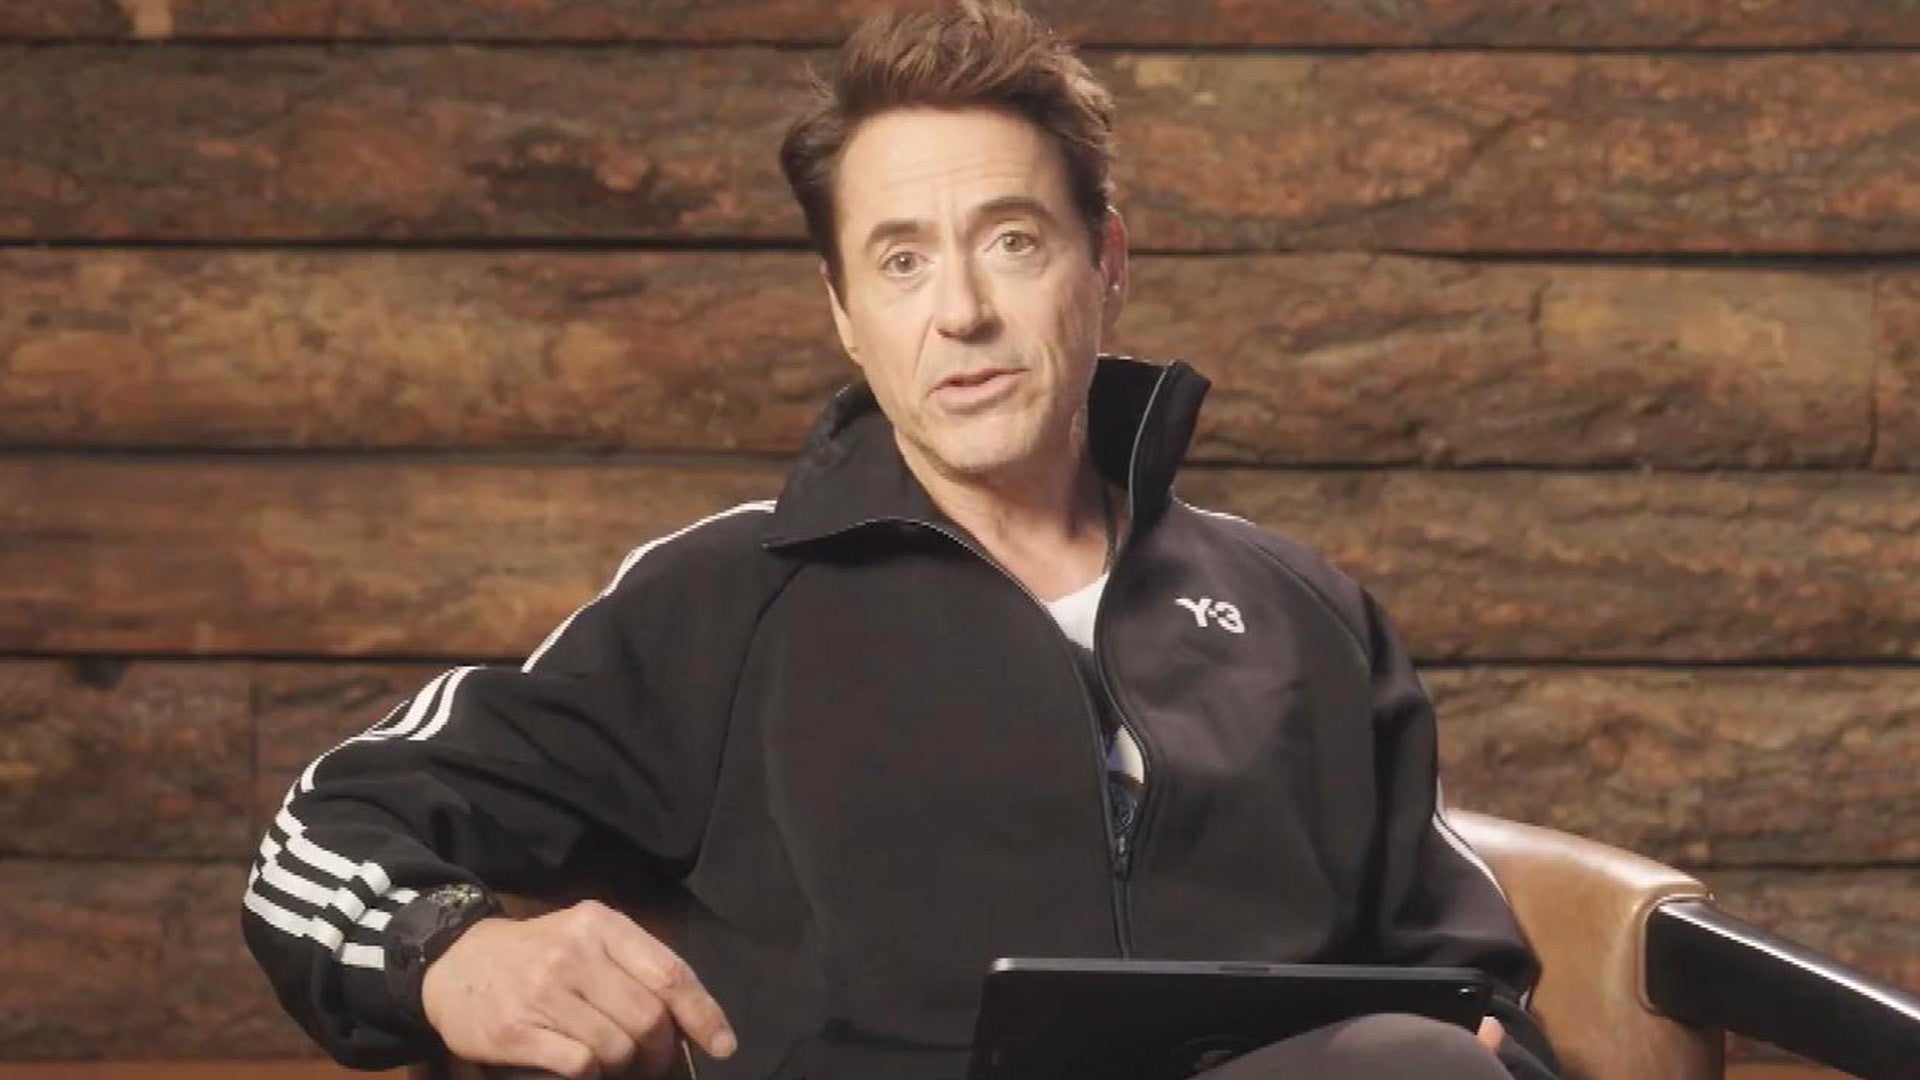 Robert Downey Jr. Reacts to Jimmy Kimmel's Oscars Joke and Says He Would 'Happily' Return as Iron Man